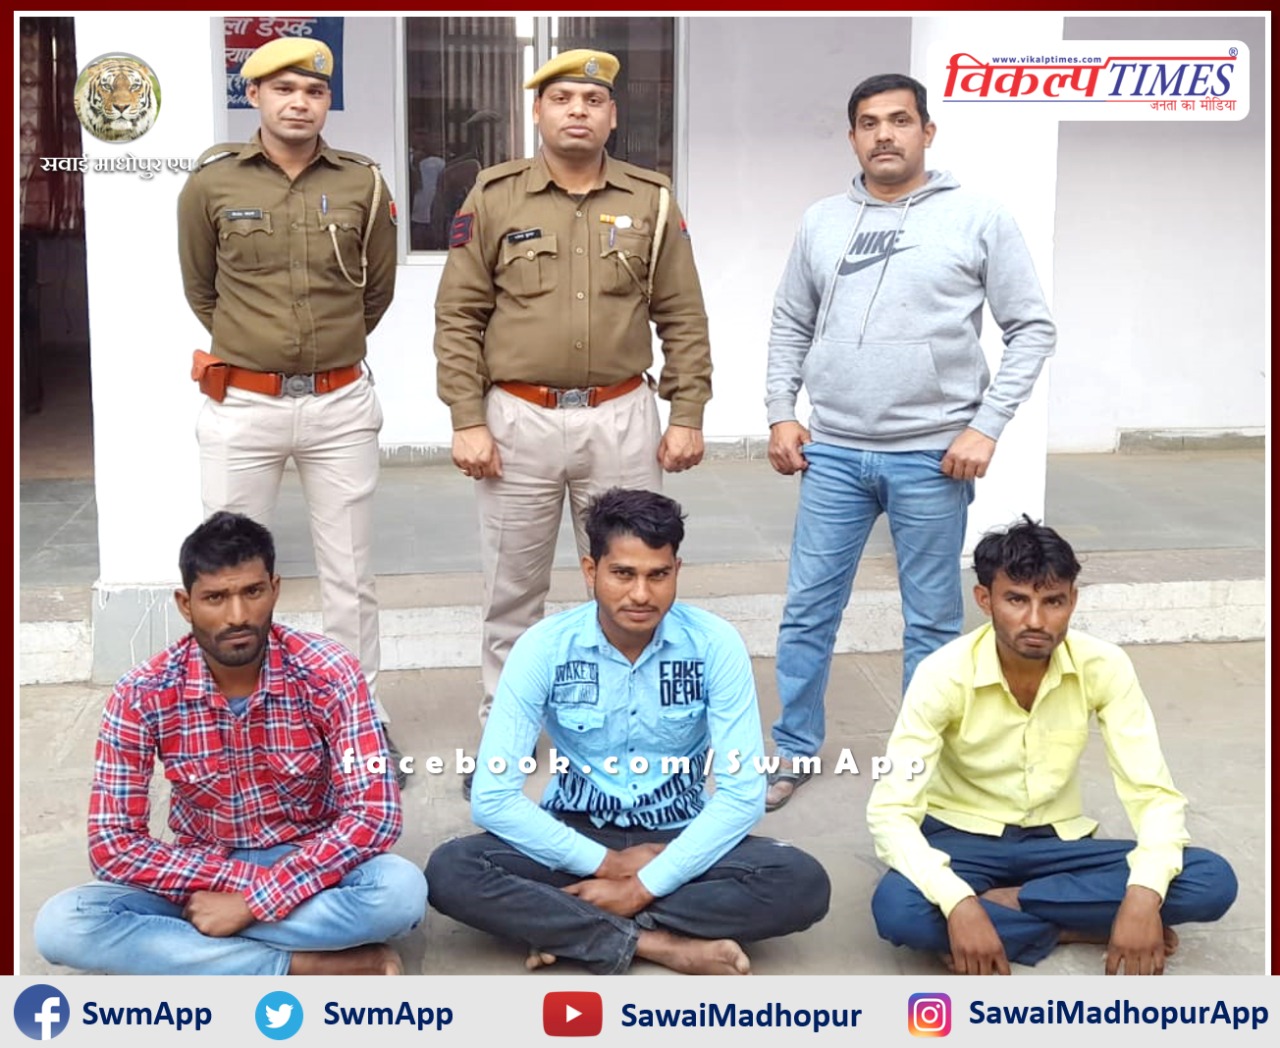 Police arrested three accused for obstructing government work in chauth ka barwara sawai madhopur